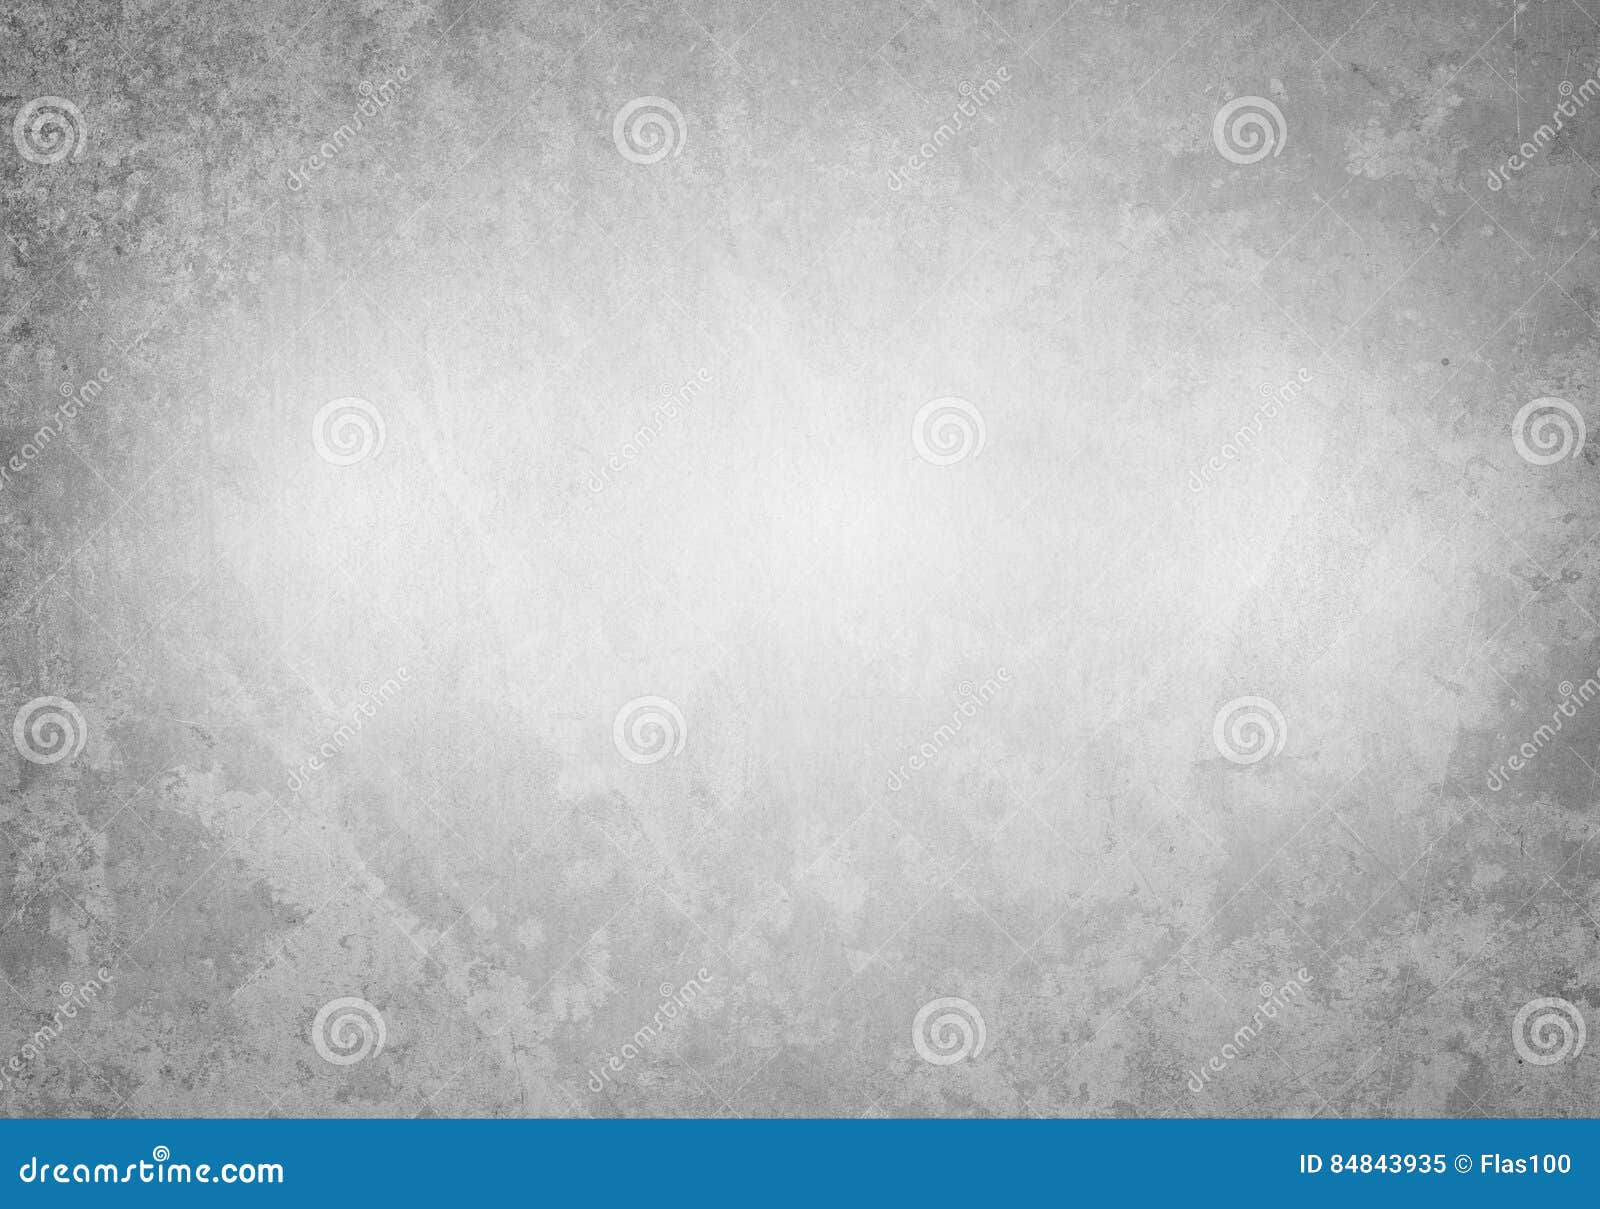 Aged Grunge Gray Metal Texture. Old Iron Background Stock Image - Image ...